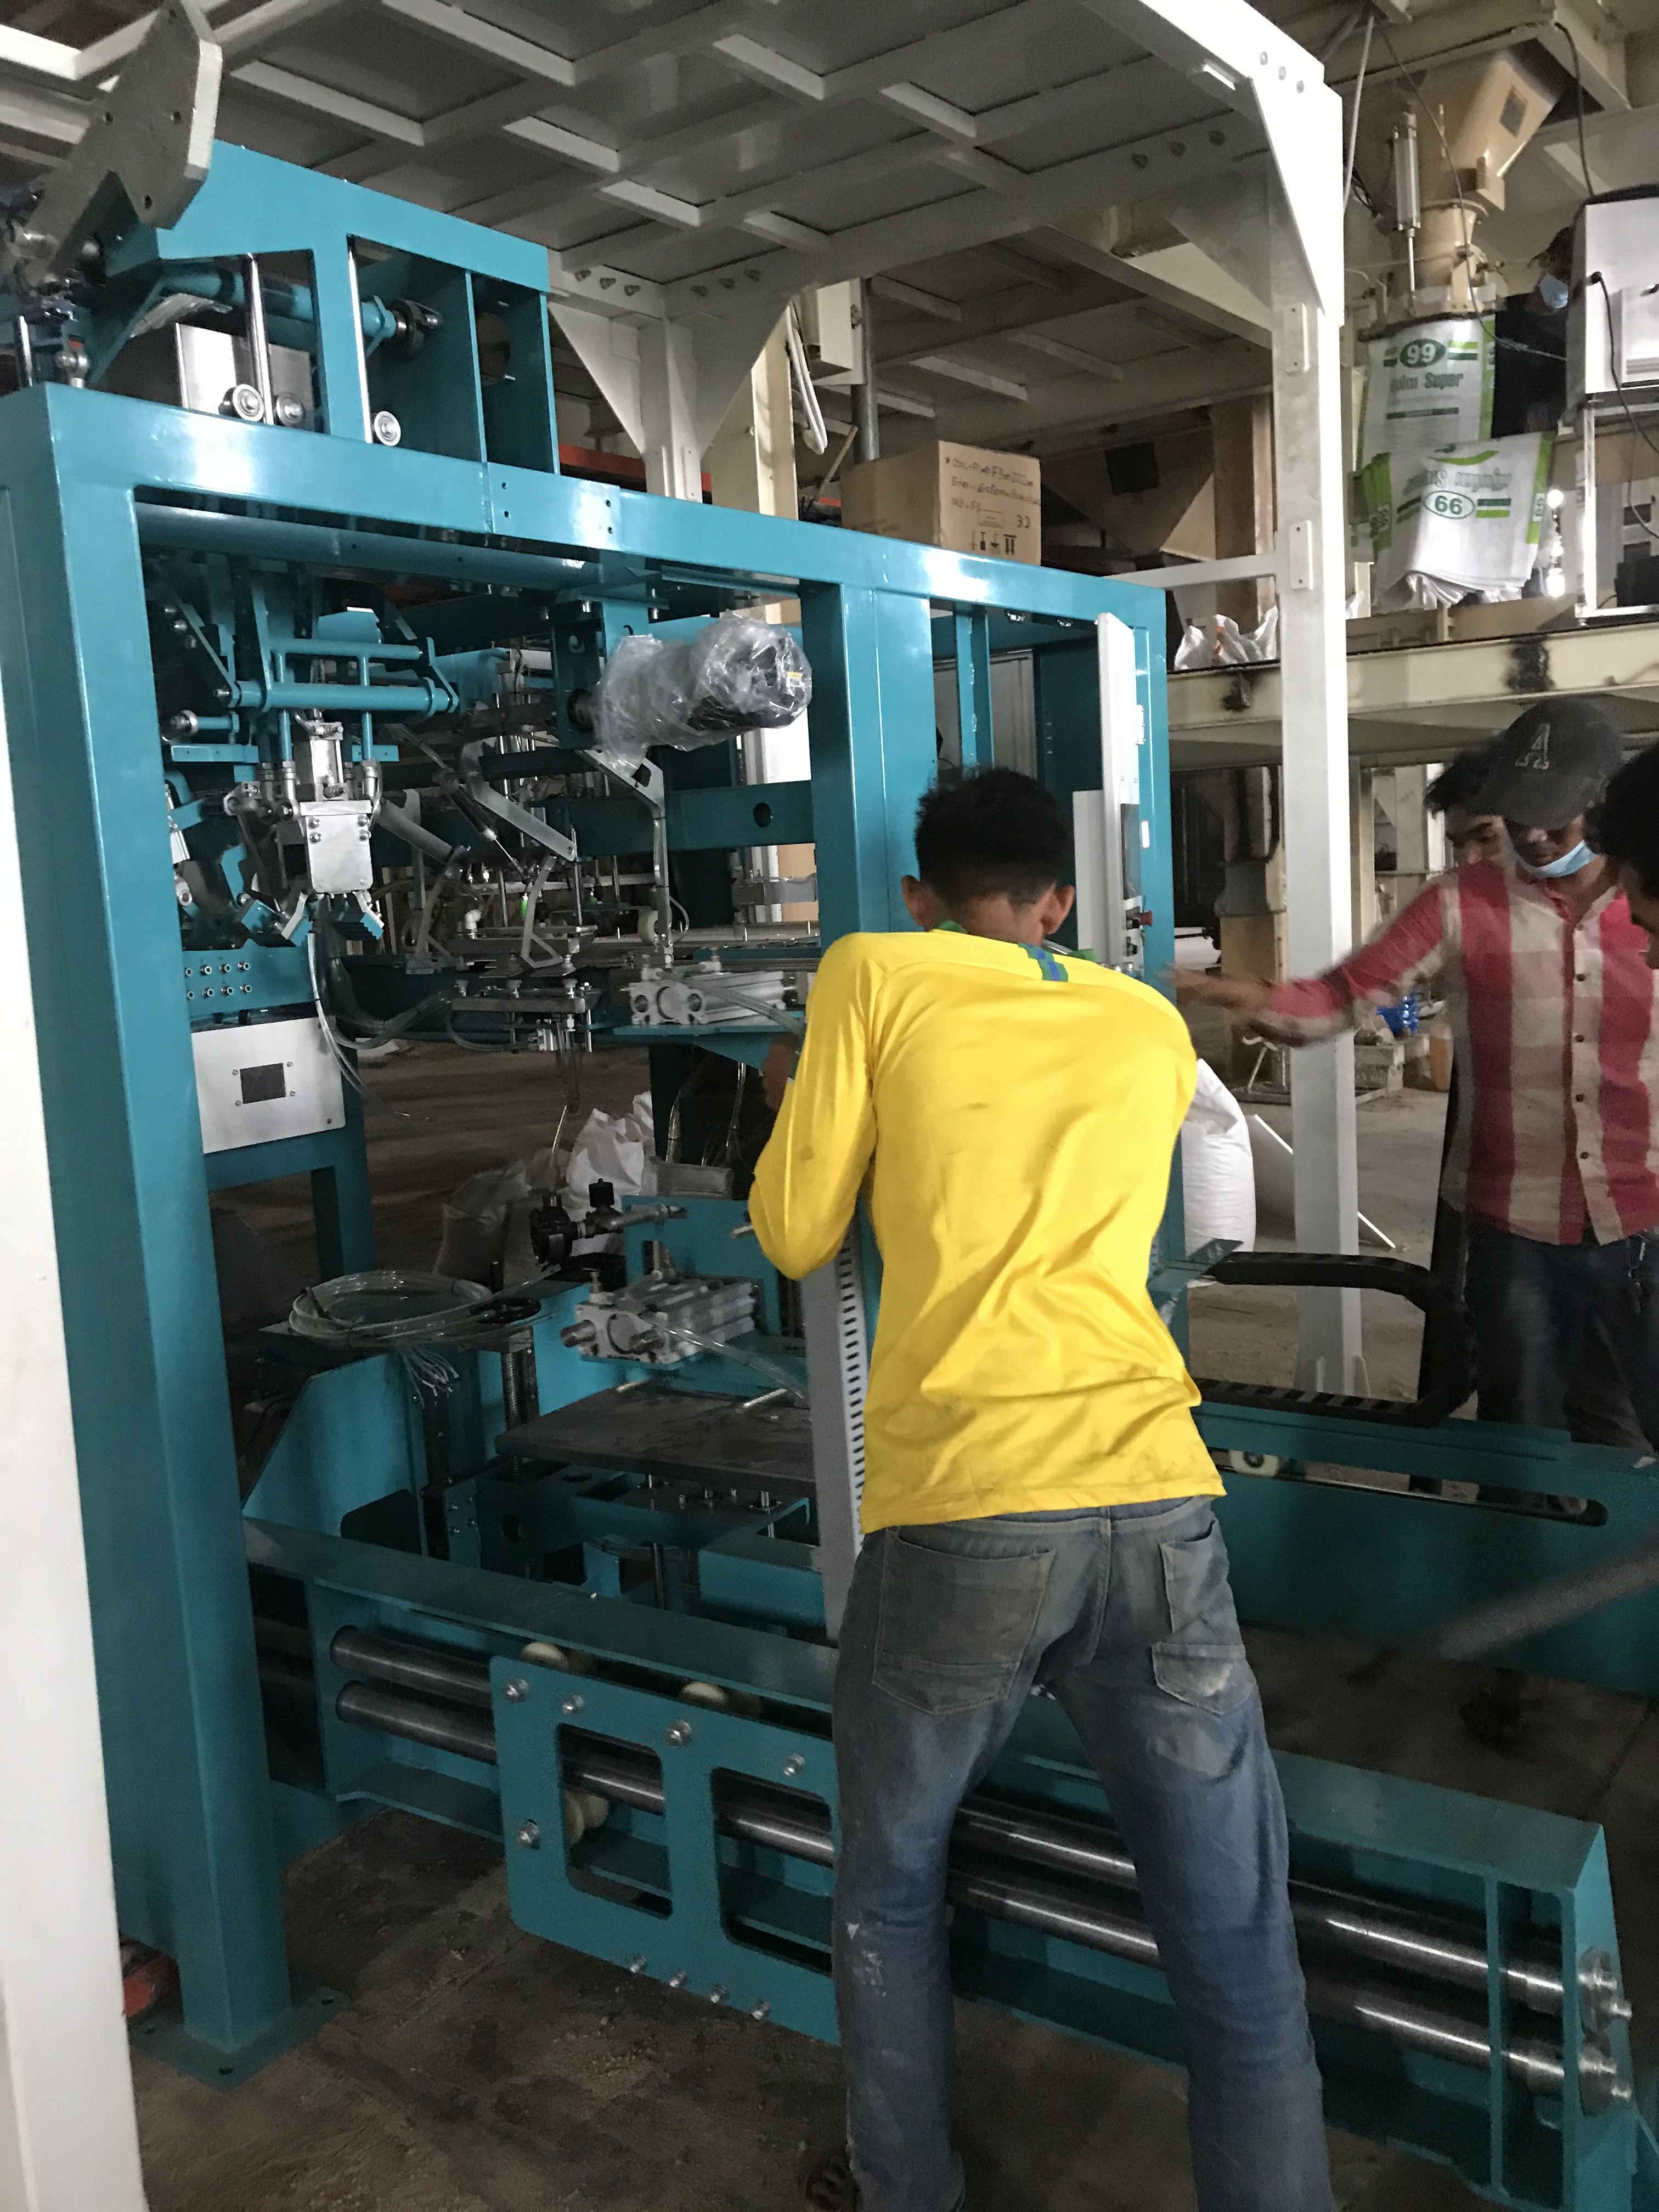 25-50KG bag Automatic packing Machine Automatic bagging machine Auto Packer for NPK and Urea fertilizers full automatic packaging line full automatic fertilizers bagging palletizing and wrapping syste